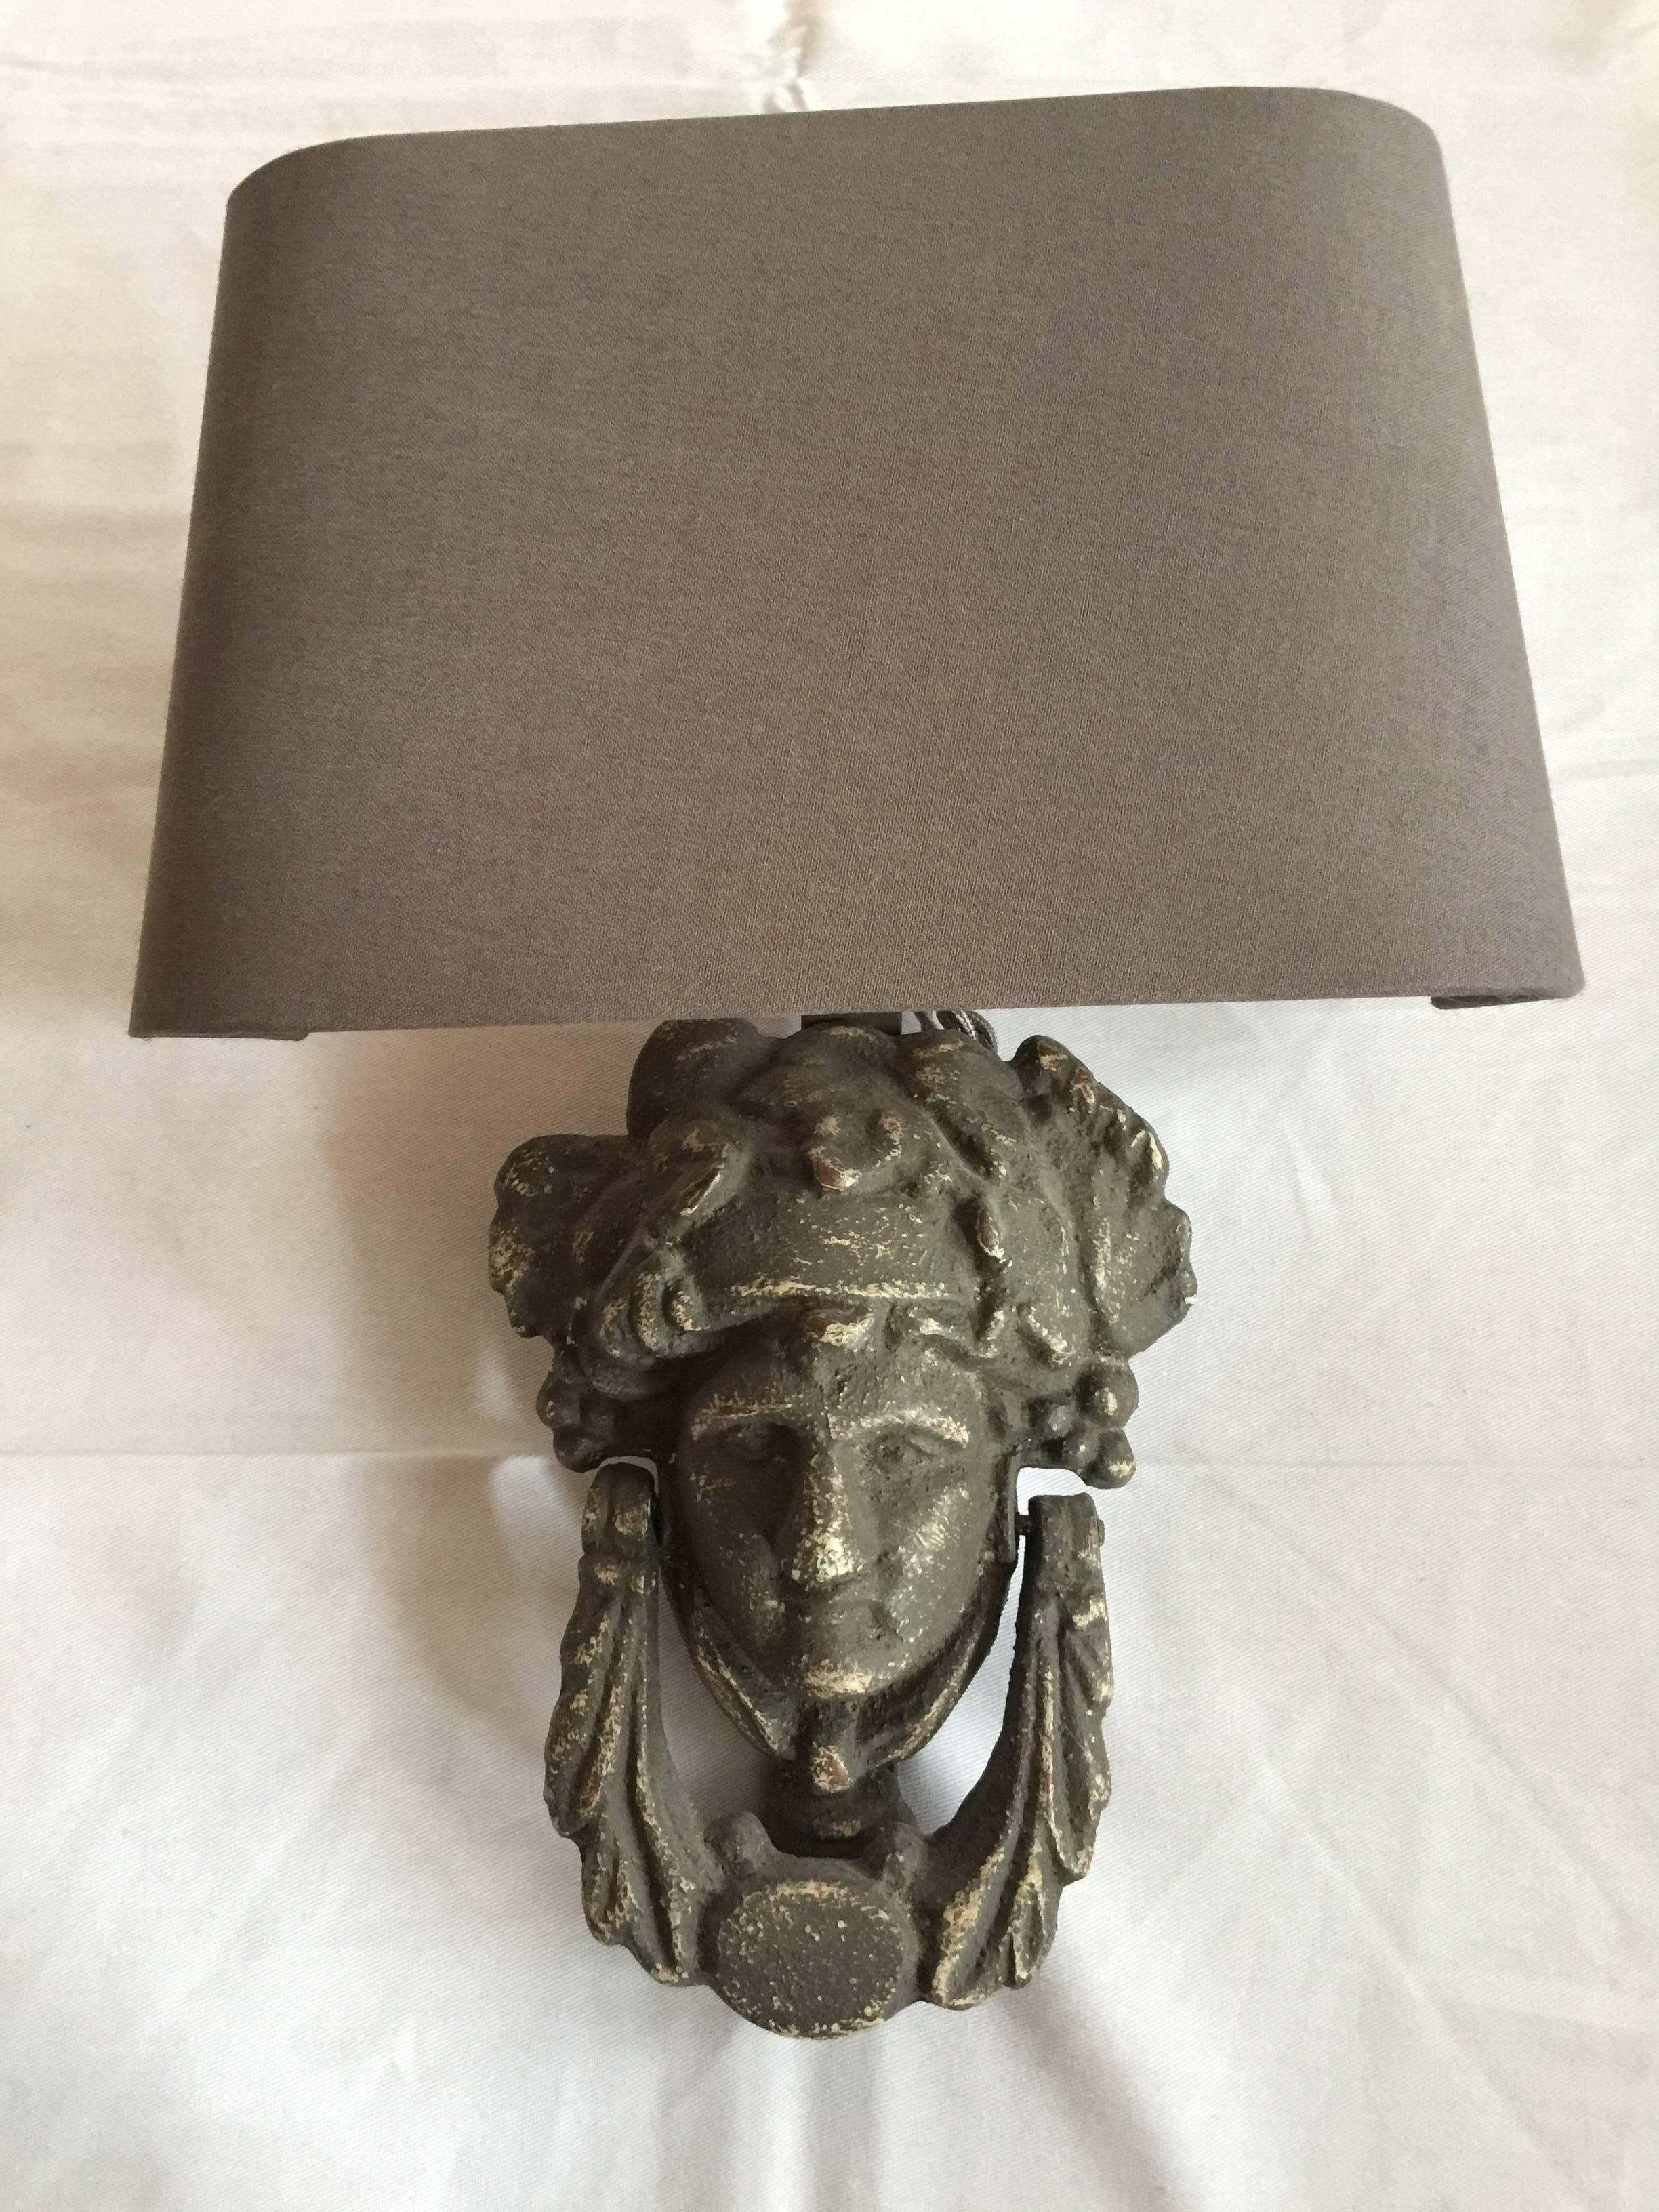 Purchased at Paris flea market at Paul Bert Serpette. Newly hard-wired pair of sconces. Made from working door knockers made of iron. Featuring image of goddess Athena. Custom grey linen shades.